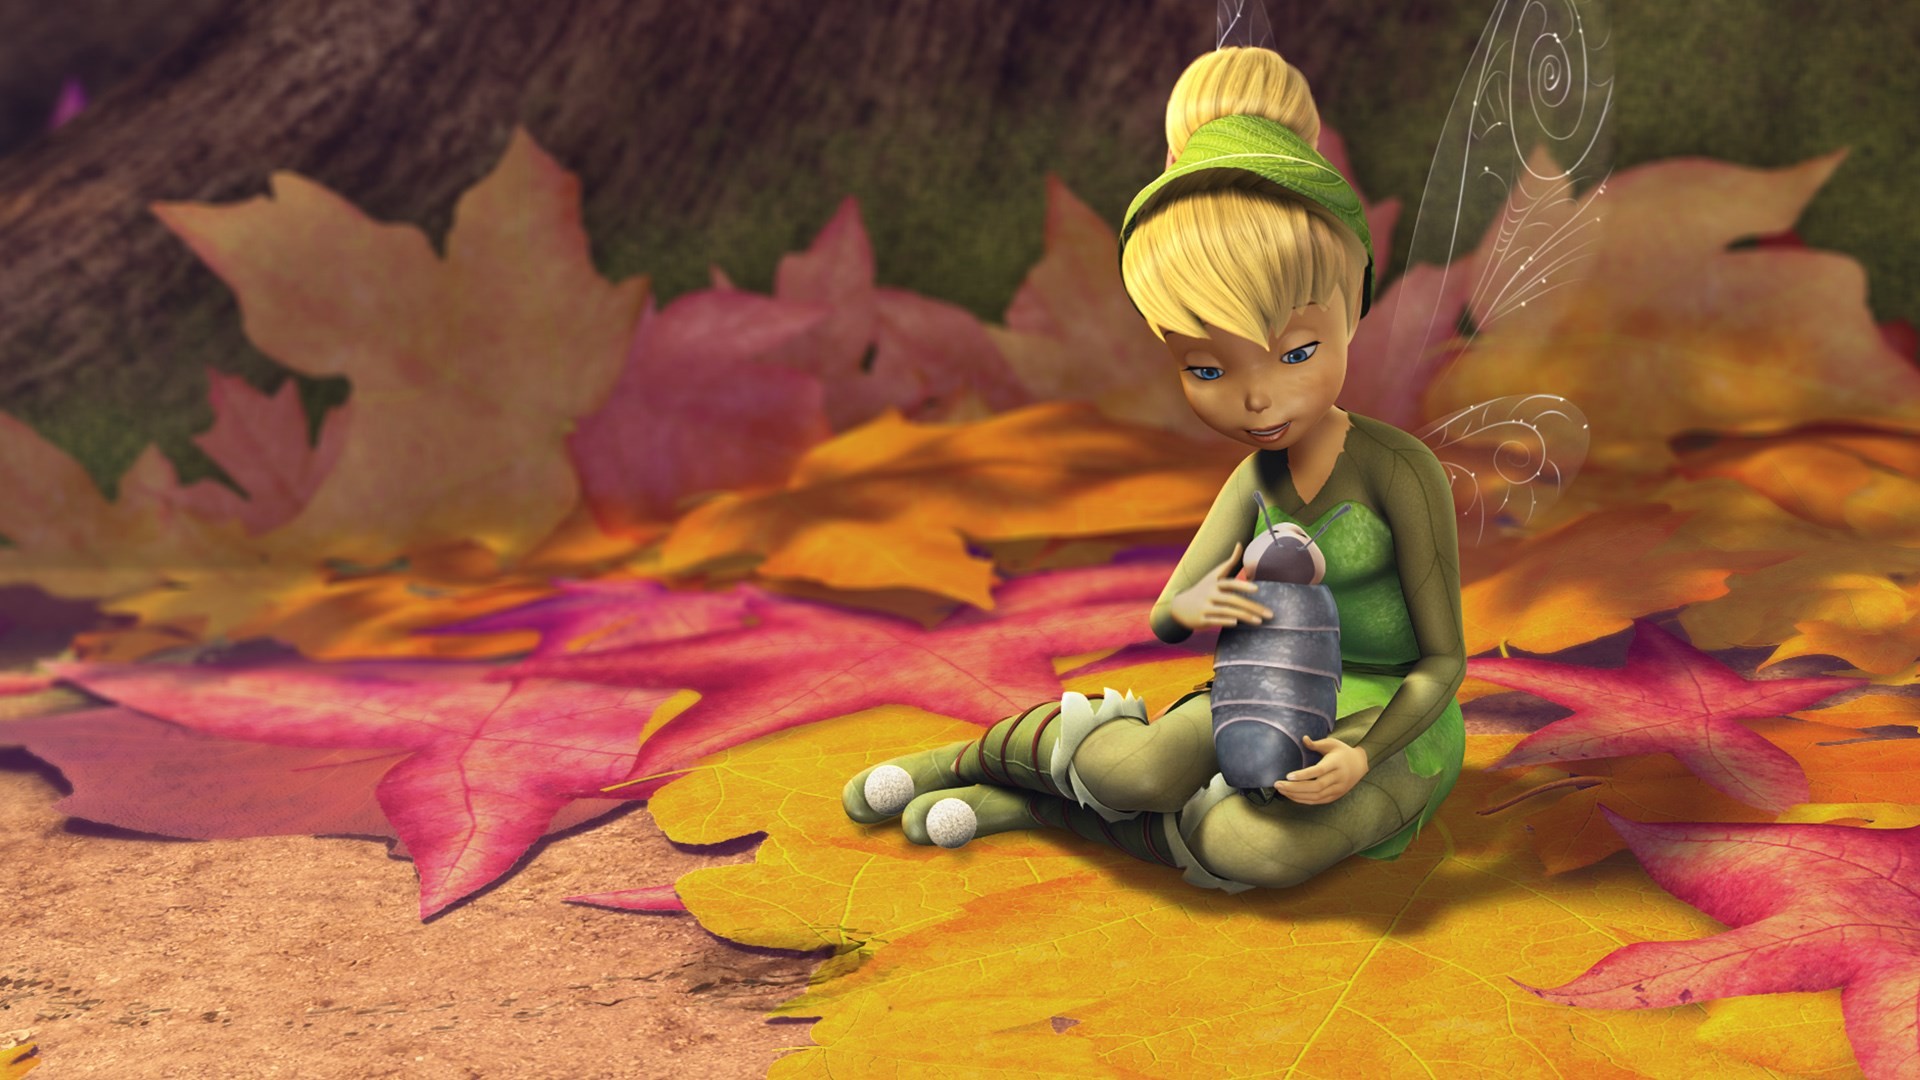 1920x1080 tinker bell and the lost treasure computer desktop backgrounds,   (342 kB)